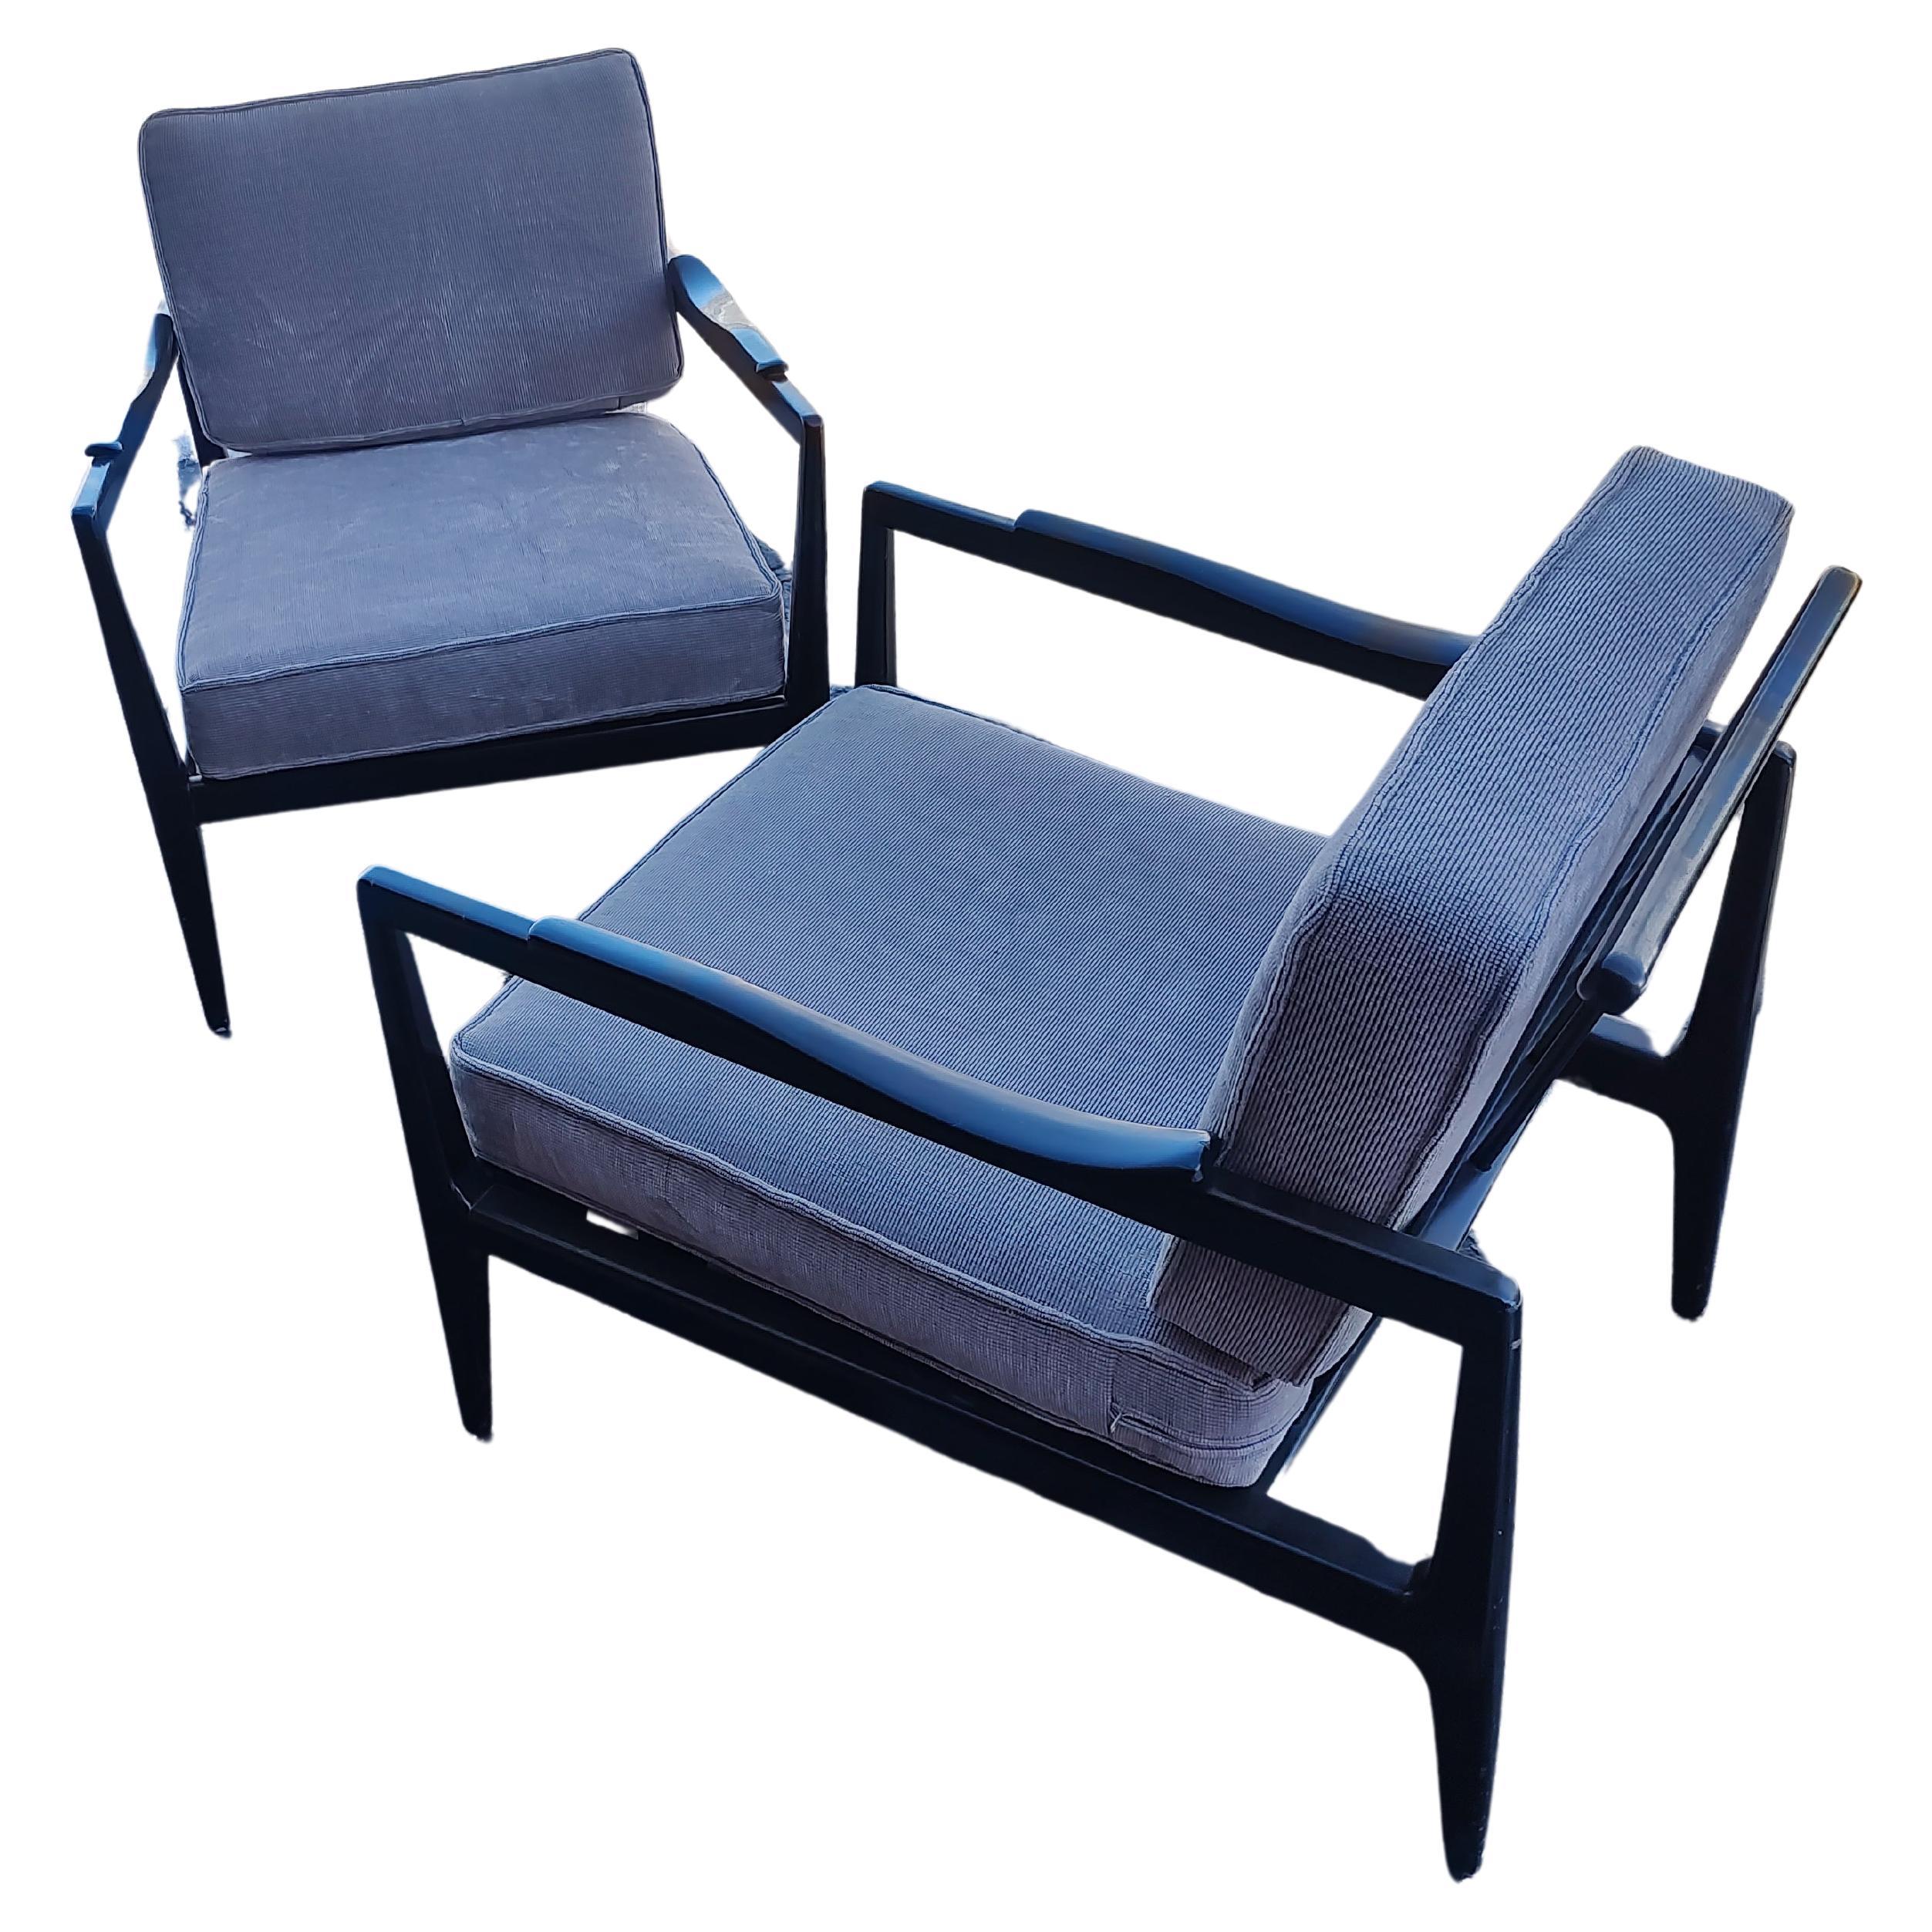 Pair of Mid Century Modern Sculptural Lounge Chairs by Edmond Spence For Sale